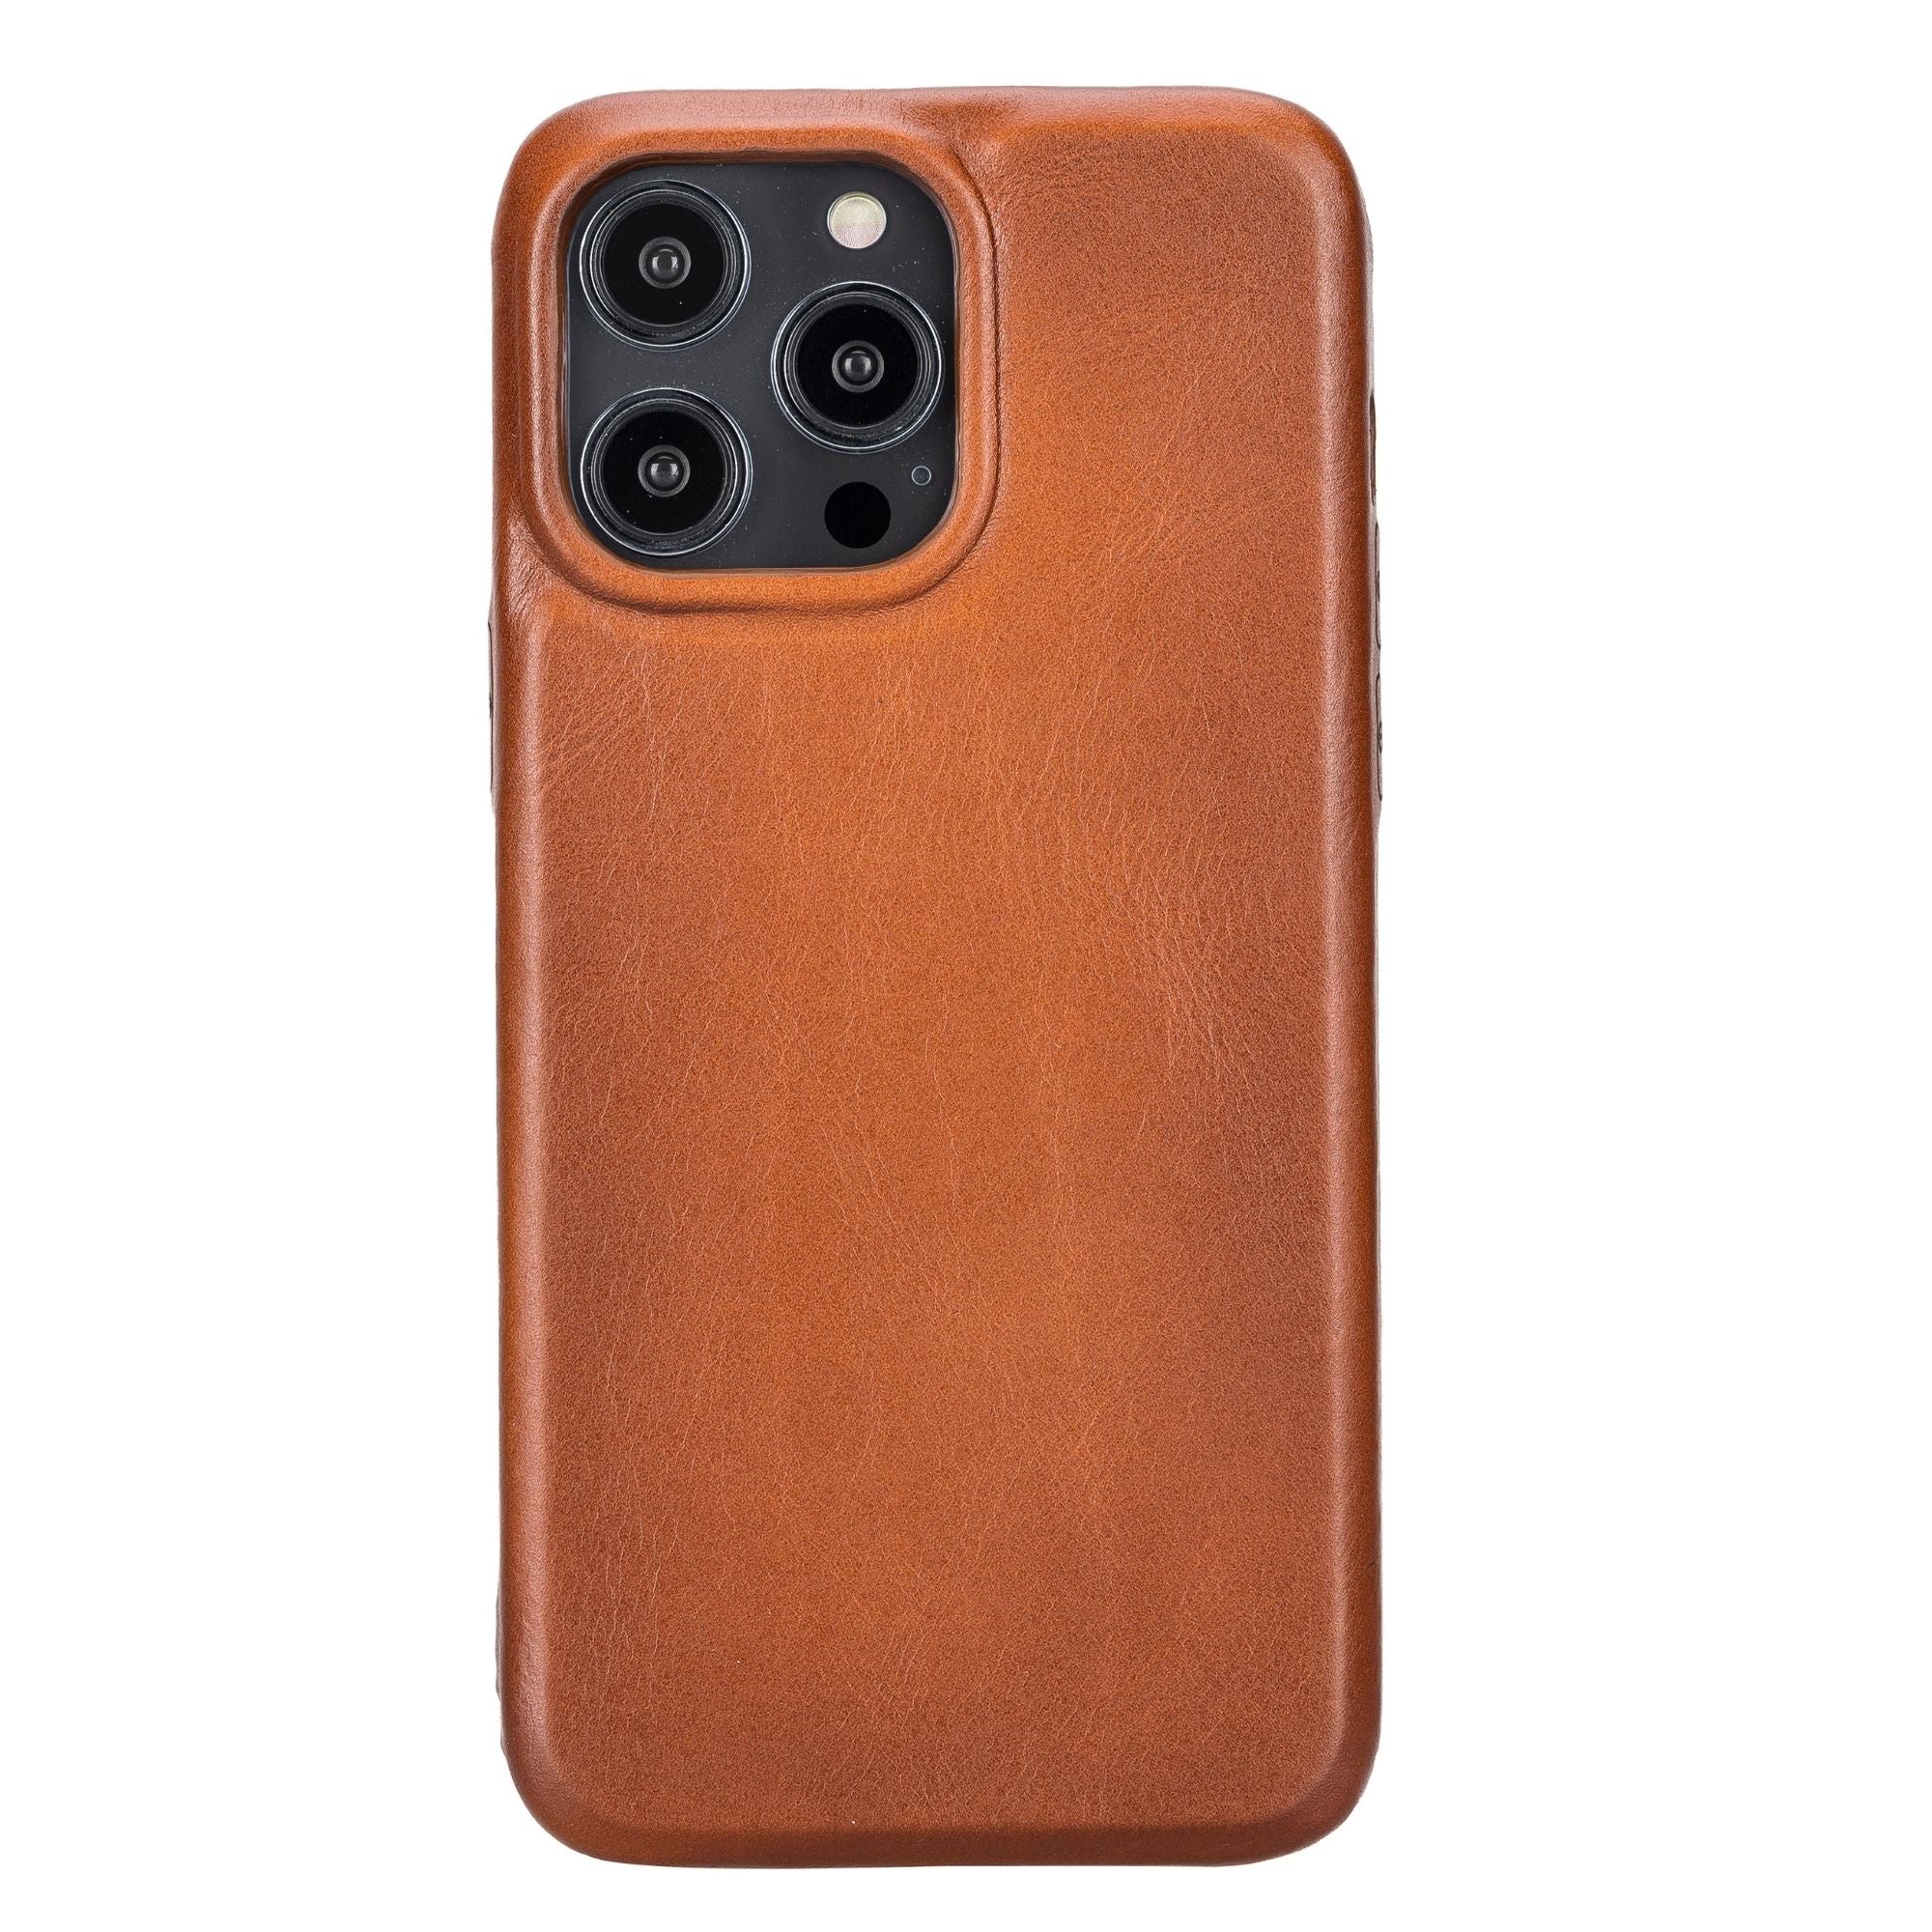 Pinedale Leather Snap-on Case for iPhone 13 Series - iPhone 13 Pro Max - Tan - TORONATA